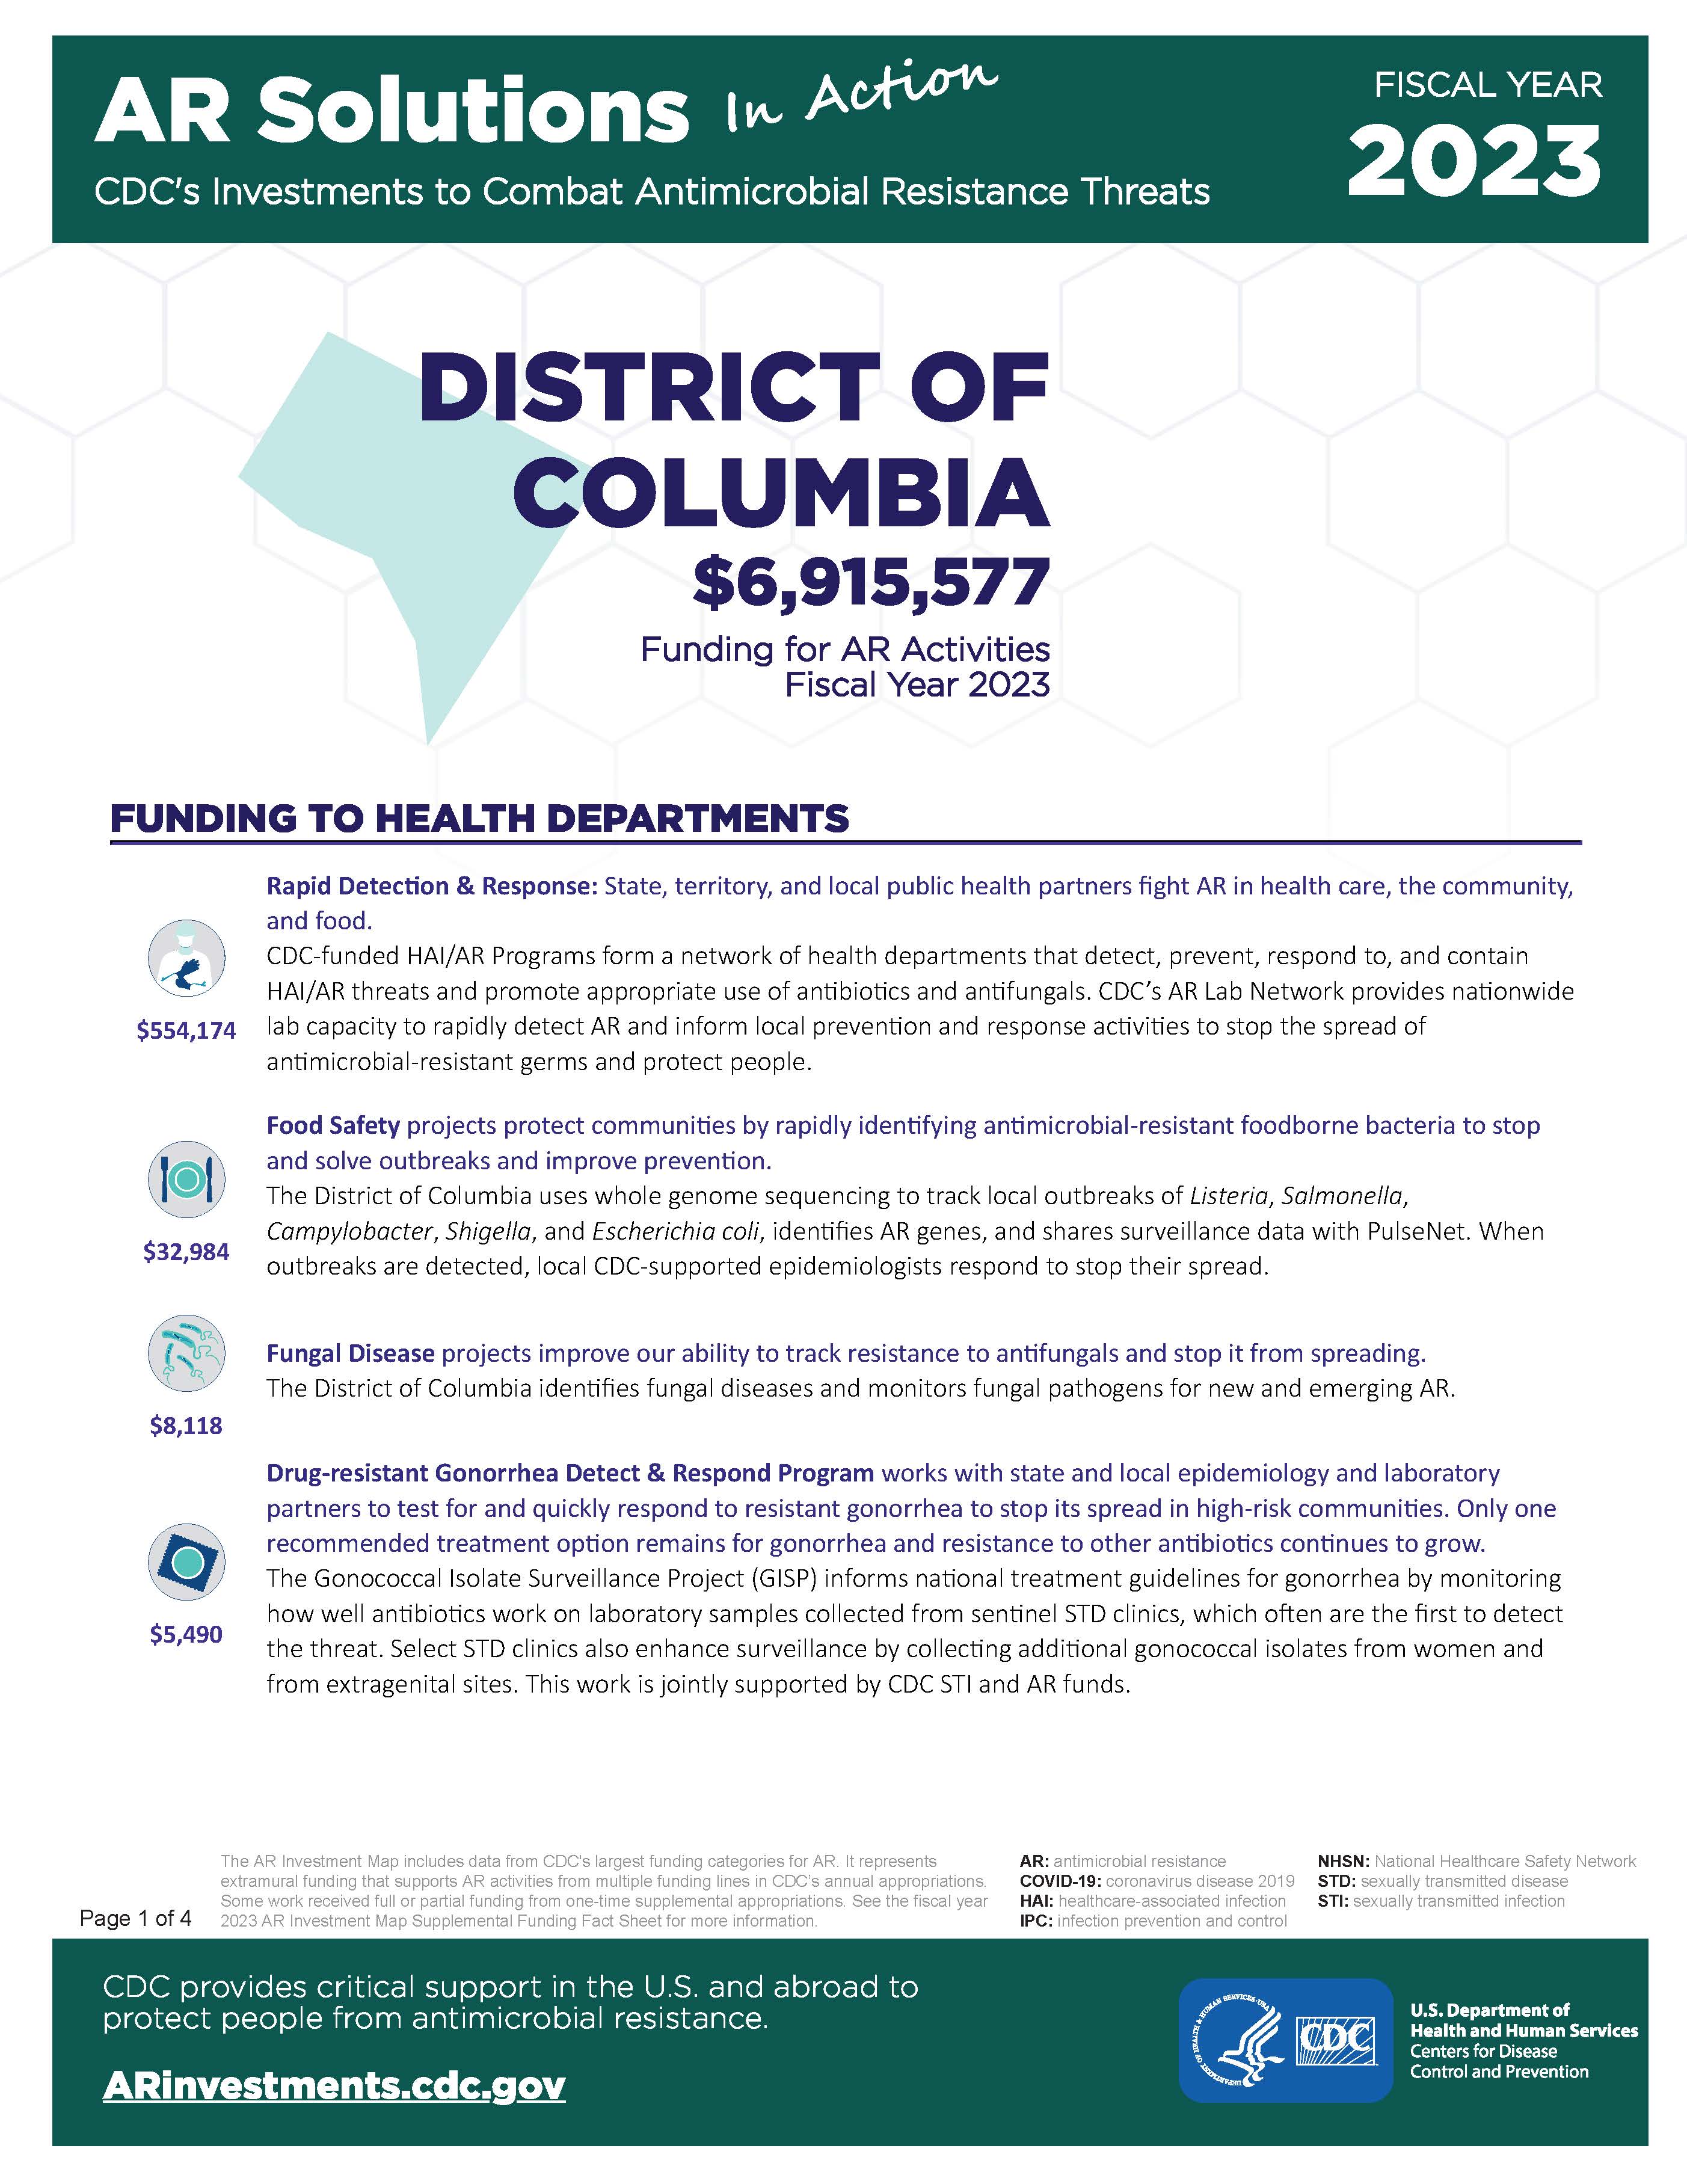 View Factsheet for District of Columbia